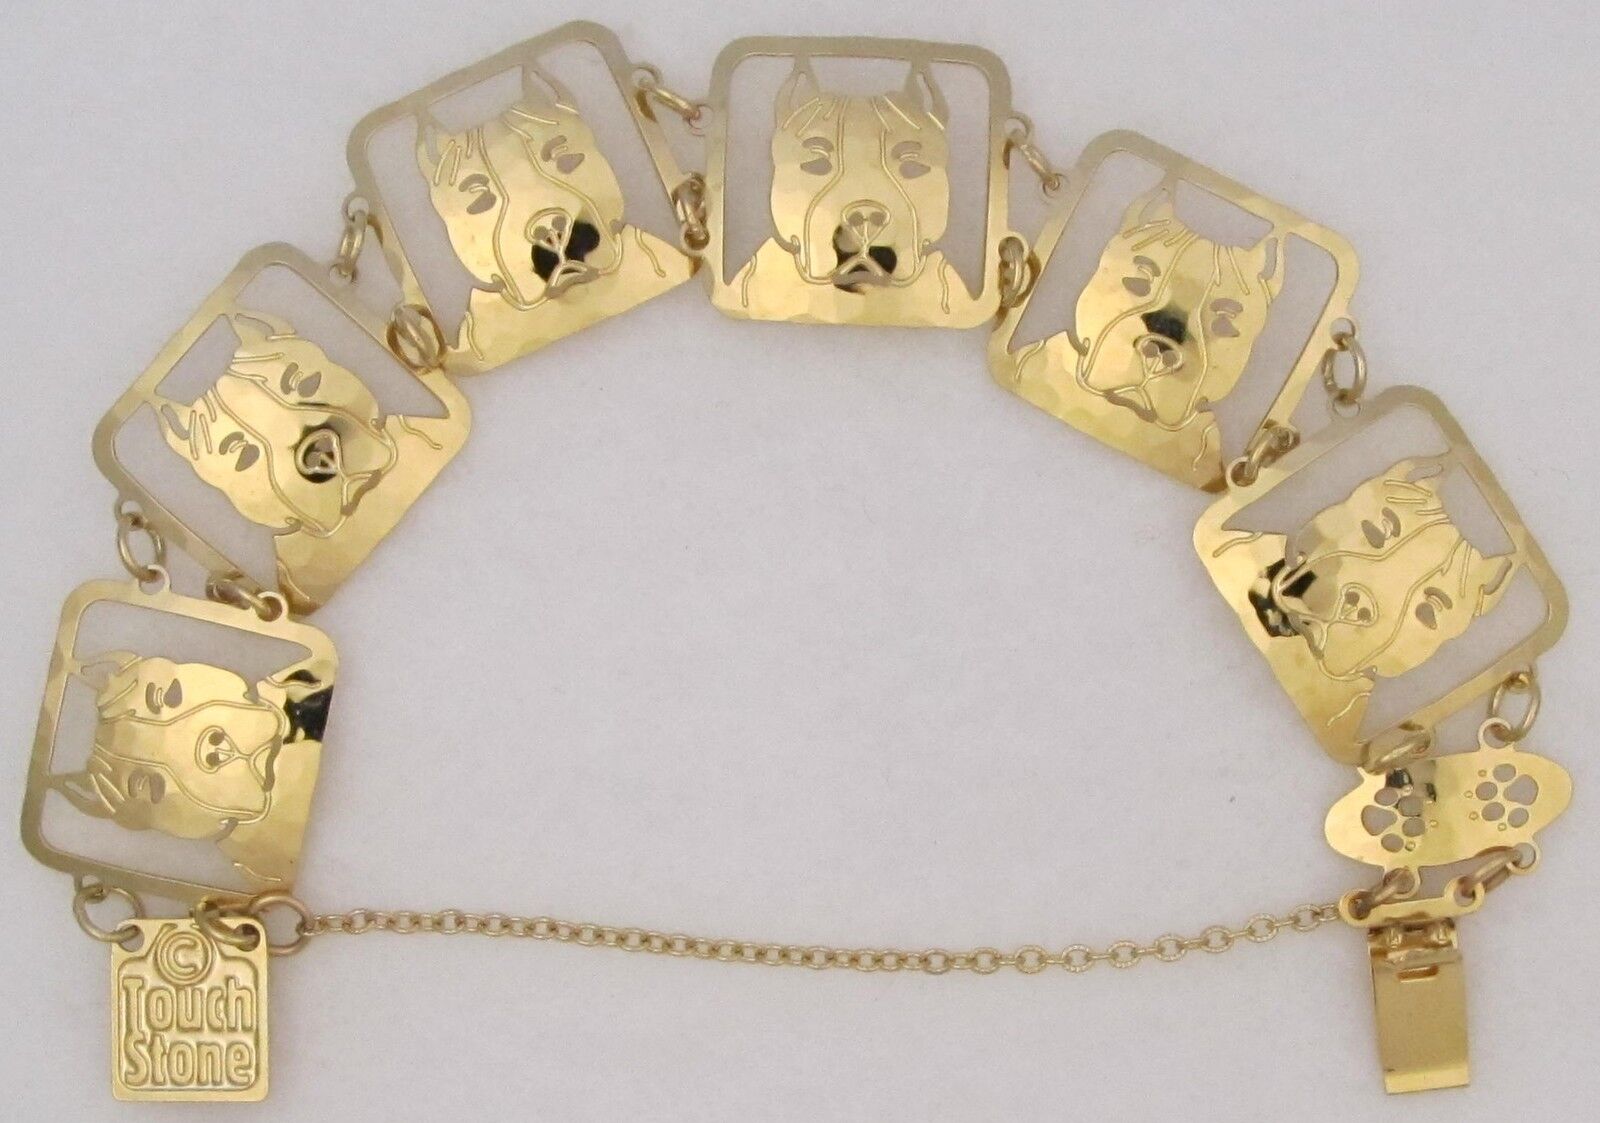 American Staffordshire Terrier Jewelry Gold Bracelet by Touchstone Dog Designs 